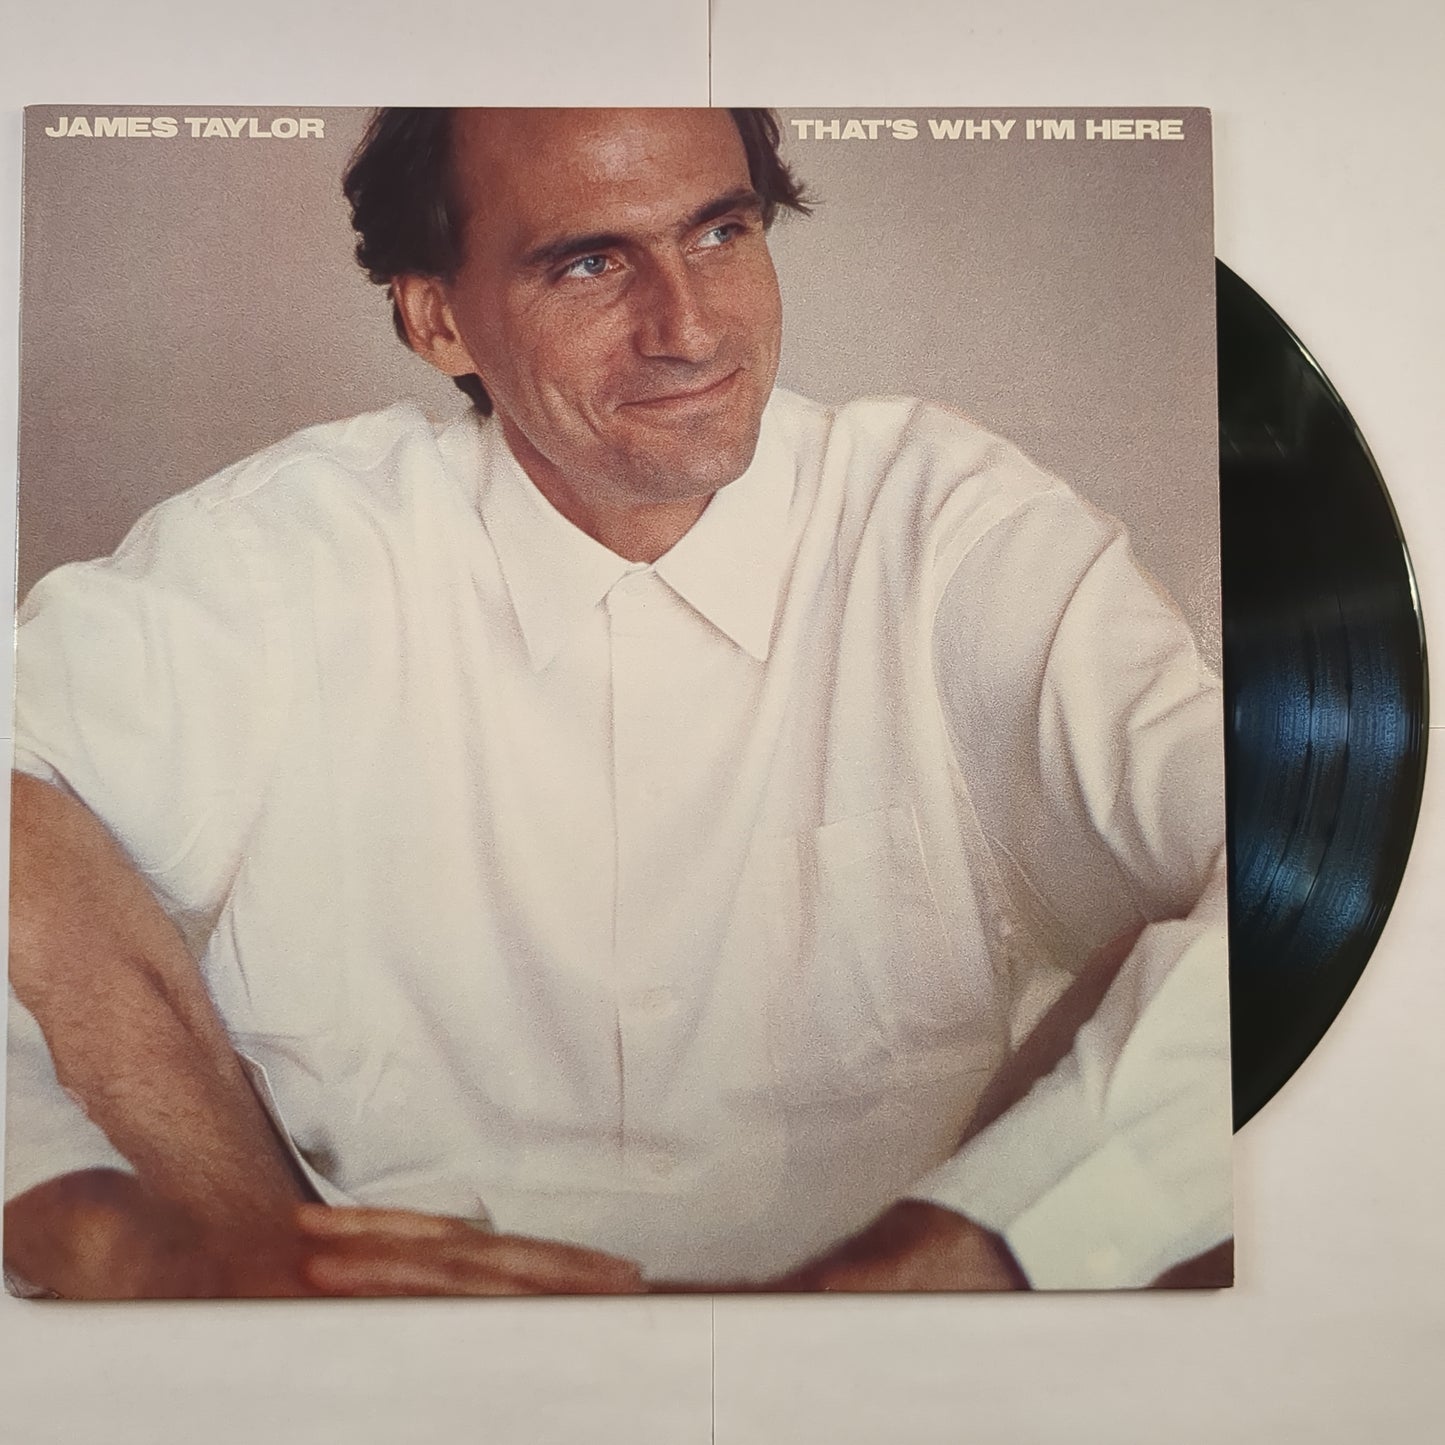 James Taylor - 'That's Why I'm Here'